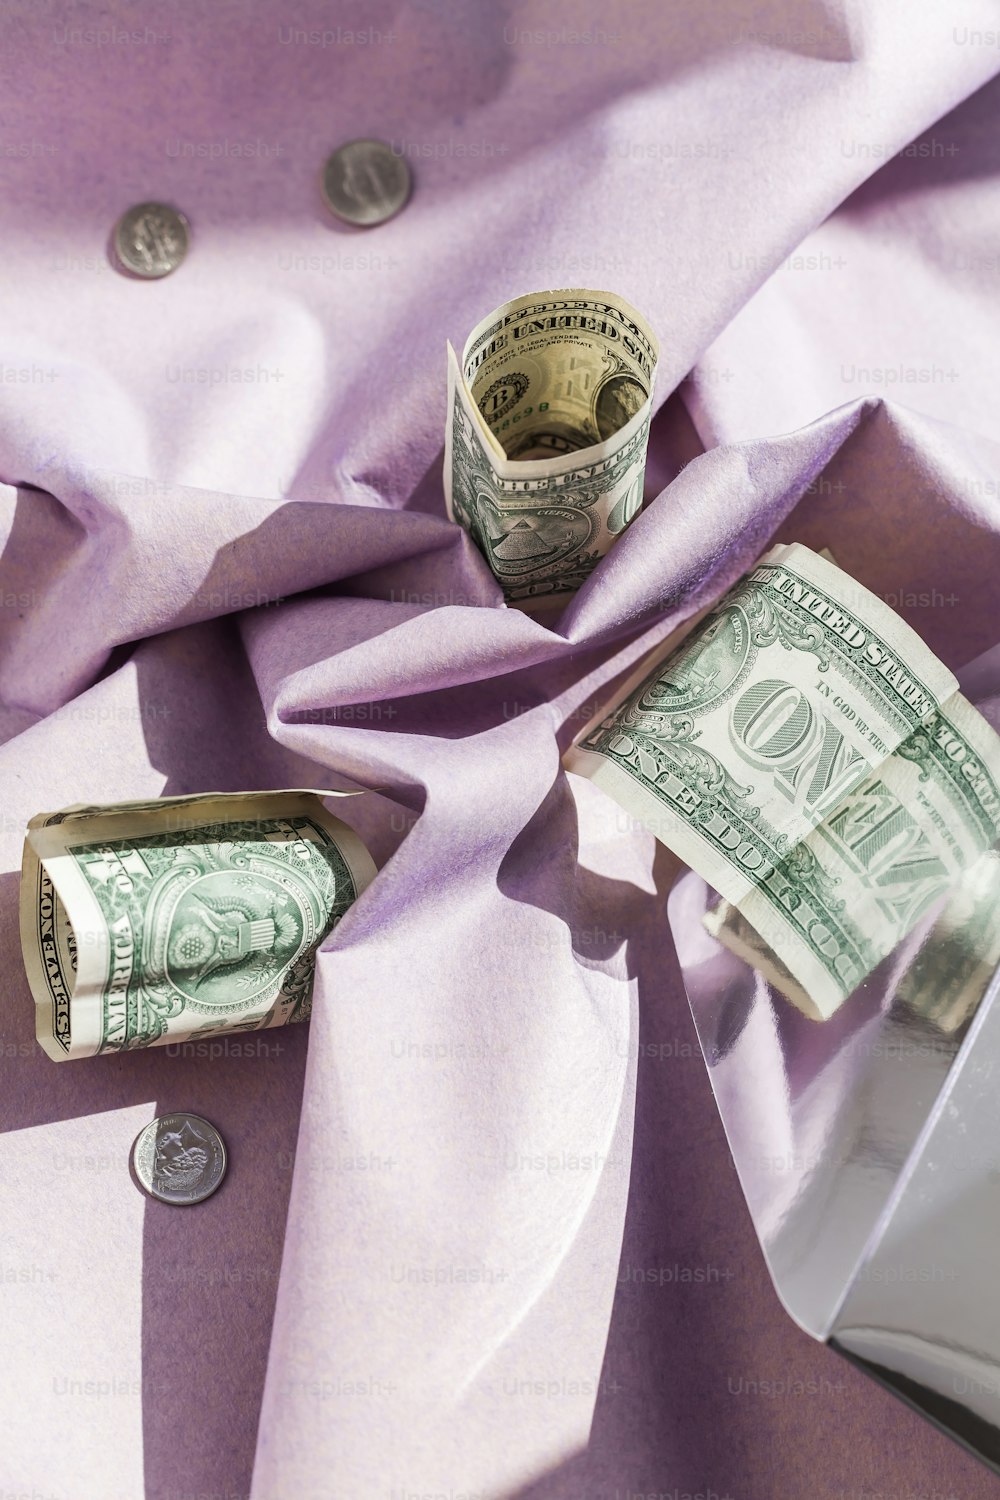 a roll of money is laying on a purple cloth